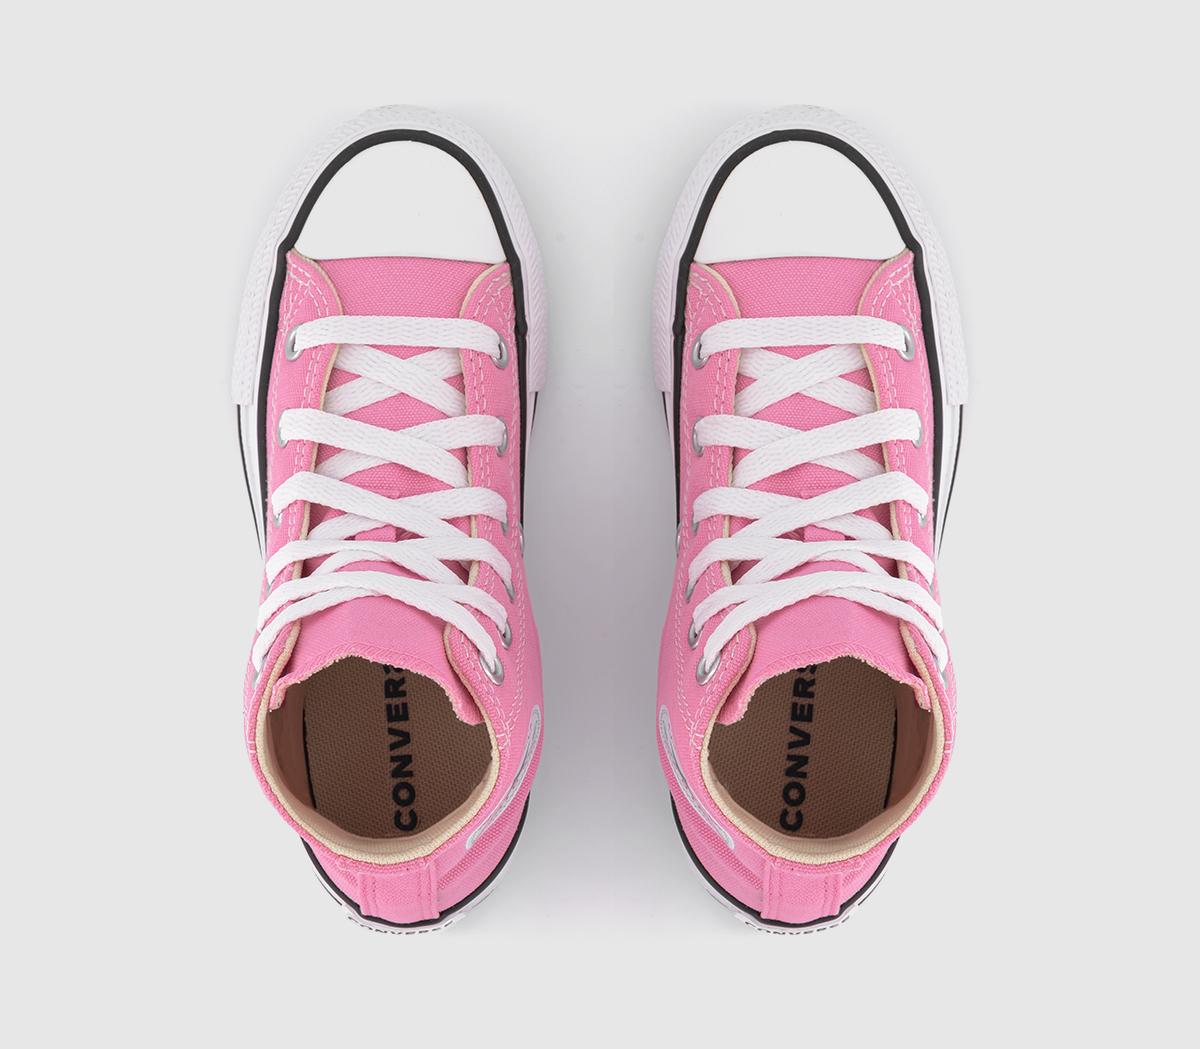 Converse All Star Hi Mid Sizes Pink Canvas - Unisex